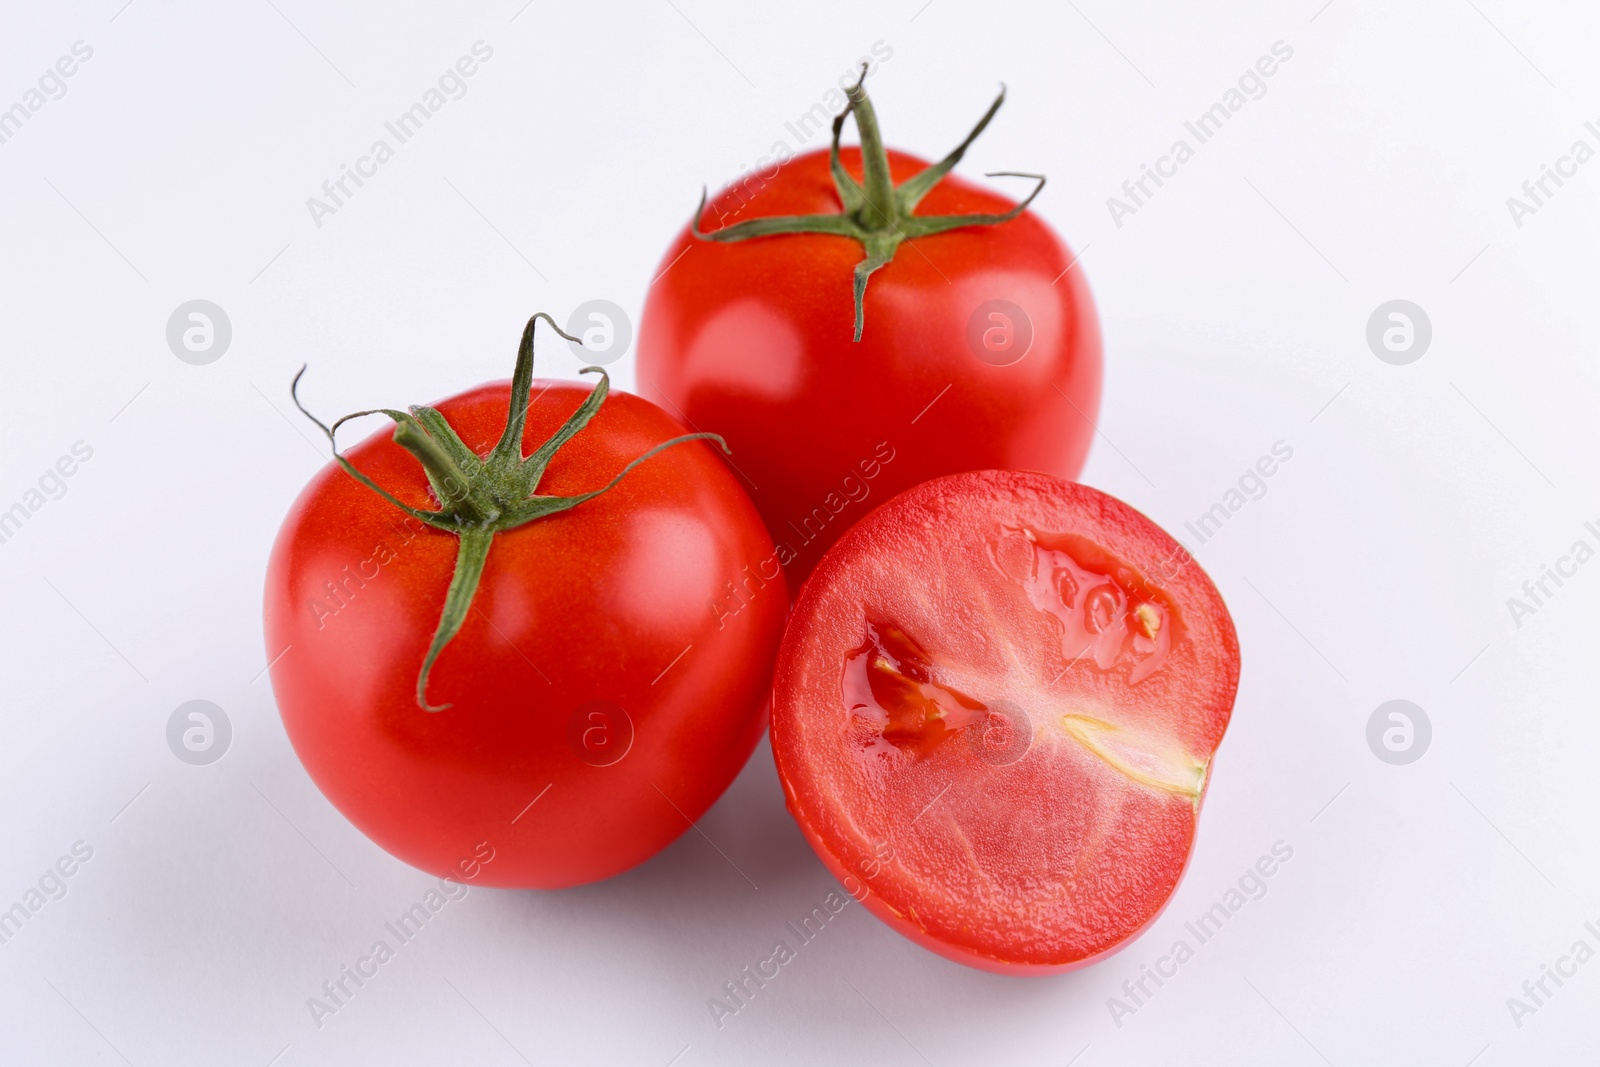 Photo of Whole and ripe red tomatoes on white background